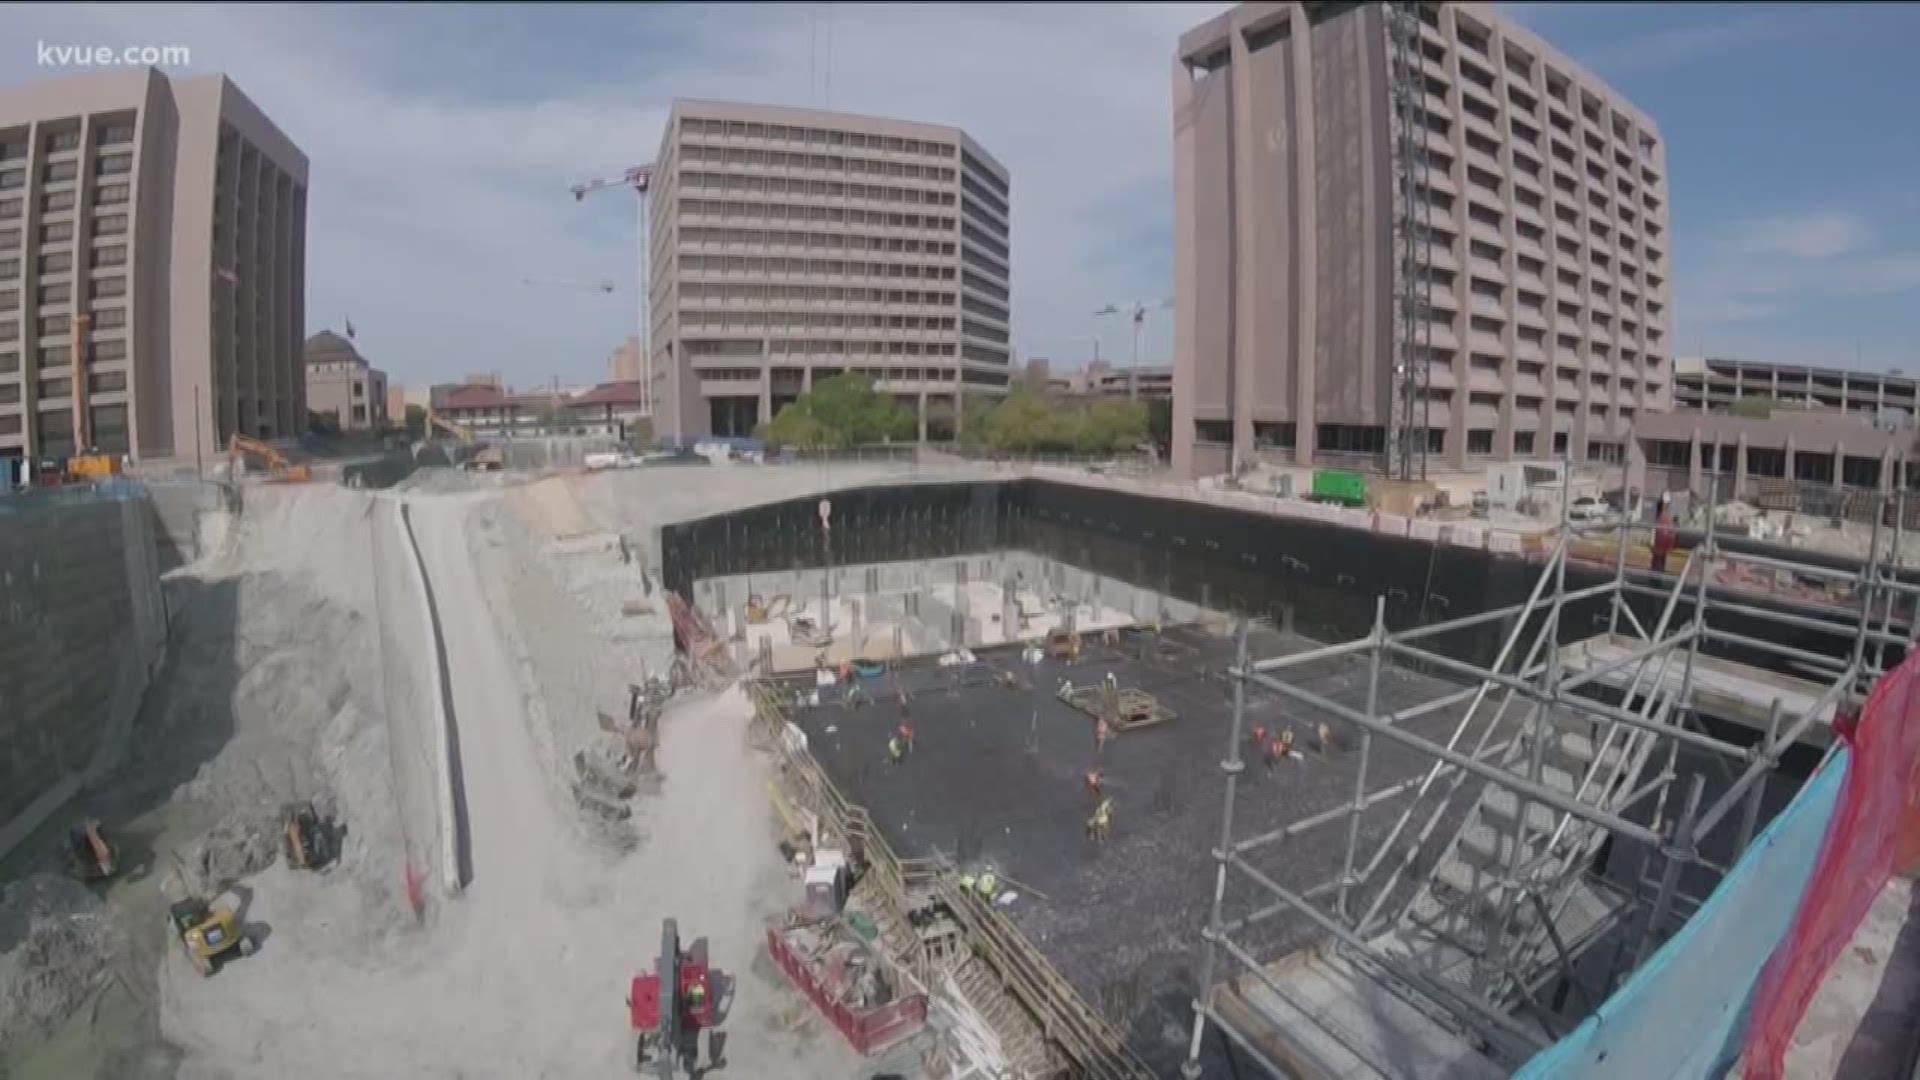 For the past couple of years construction crews have been transforming a part of downtown.